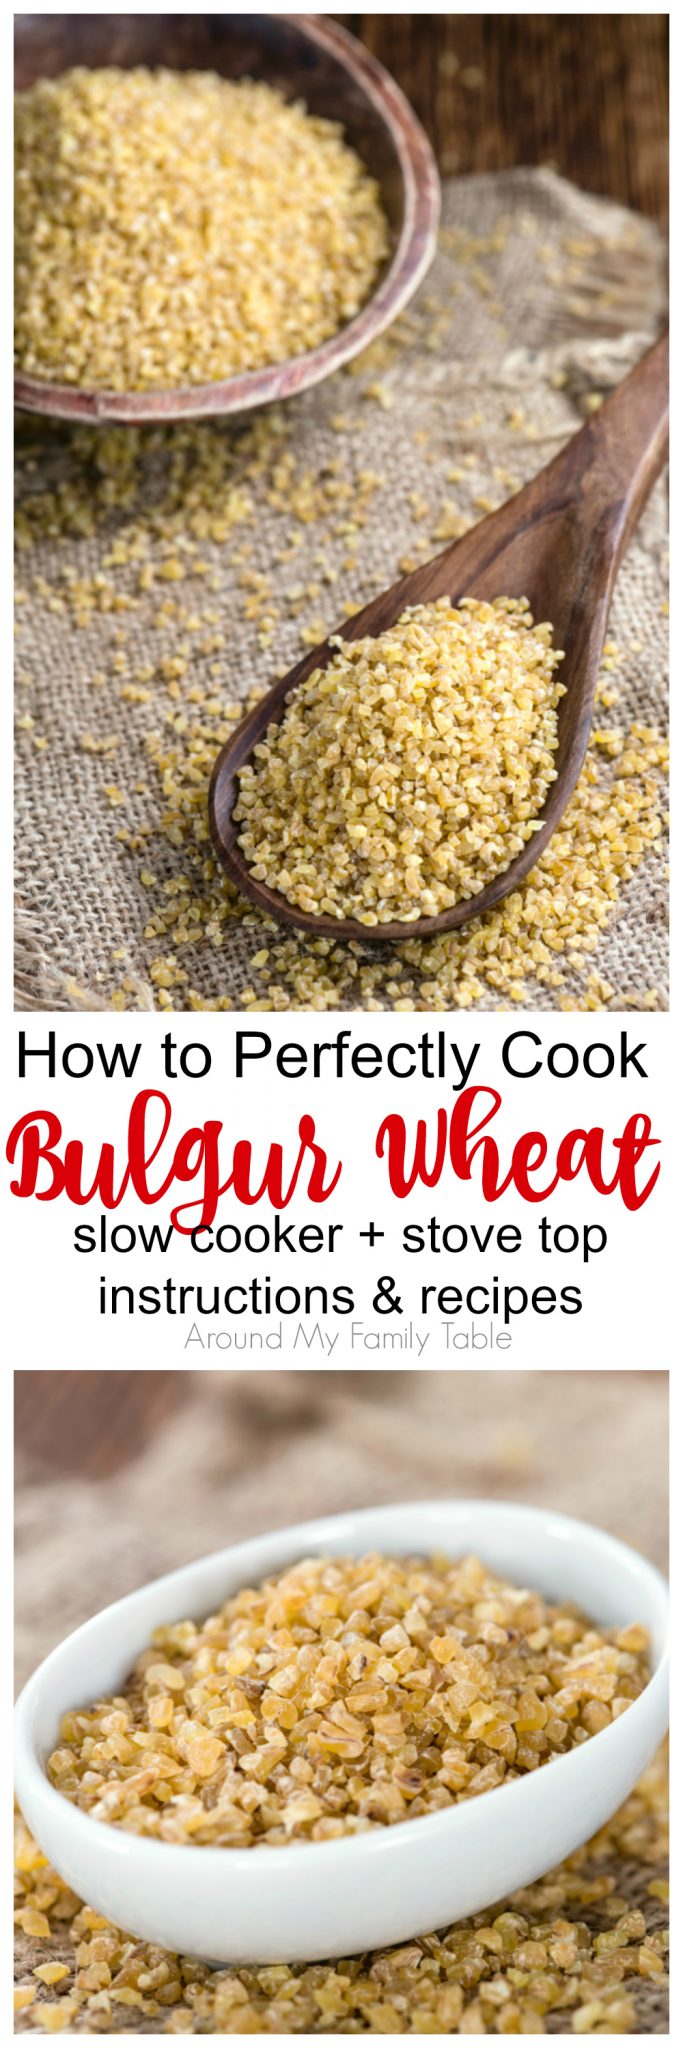 Bulgur Wheat is one of the easiest grains to cook and super simple for swapping out other grains. Learning How to Cook Bulgur Wheat properly has really opened up a whole new world of grains for my family.